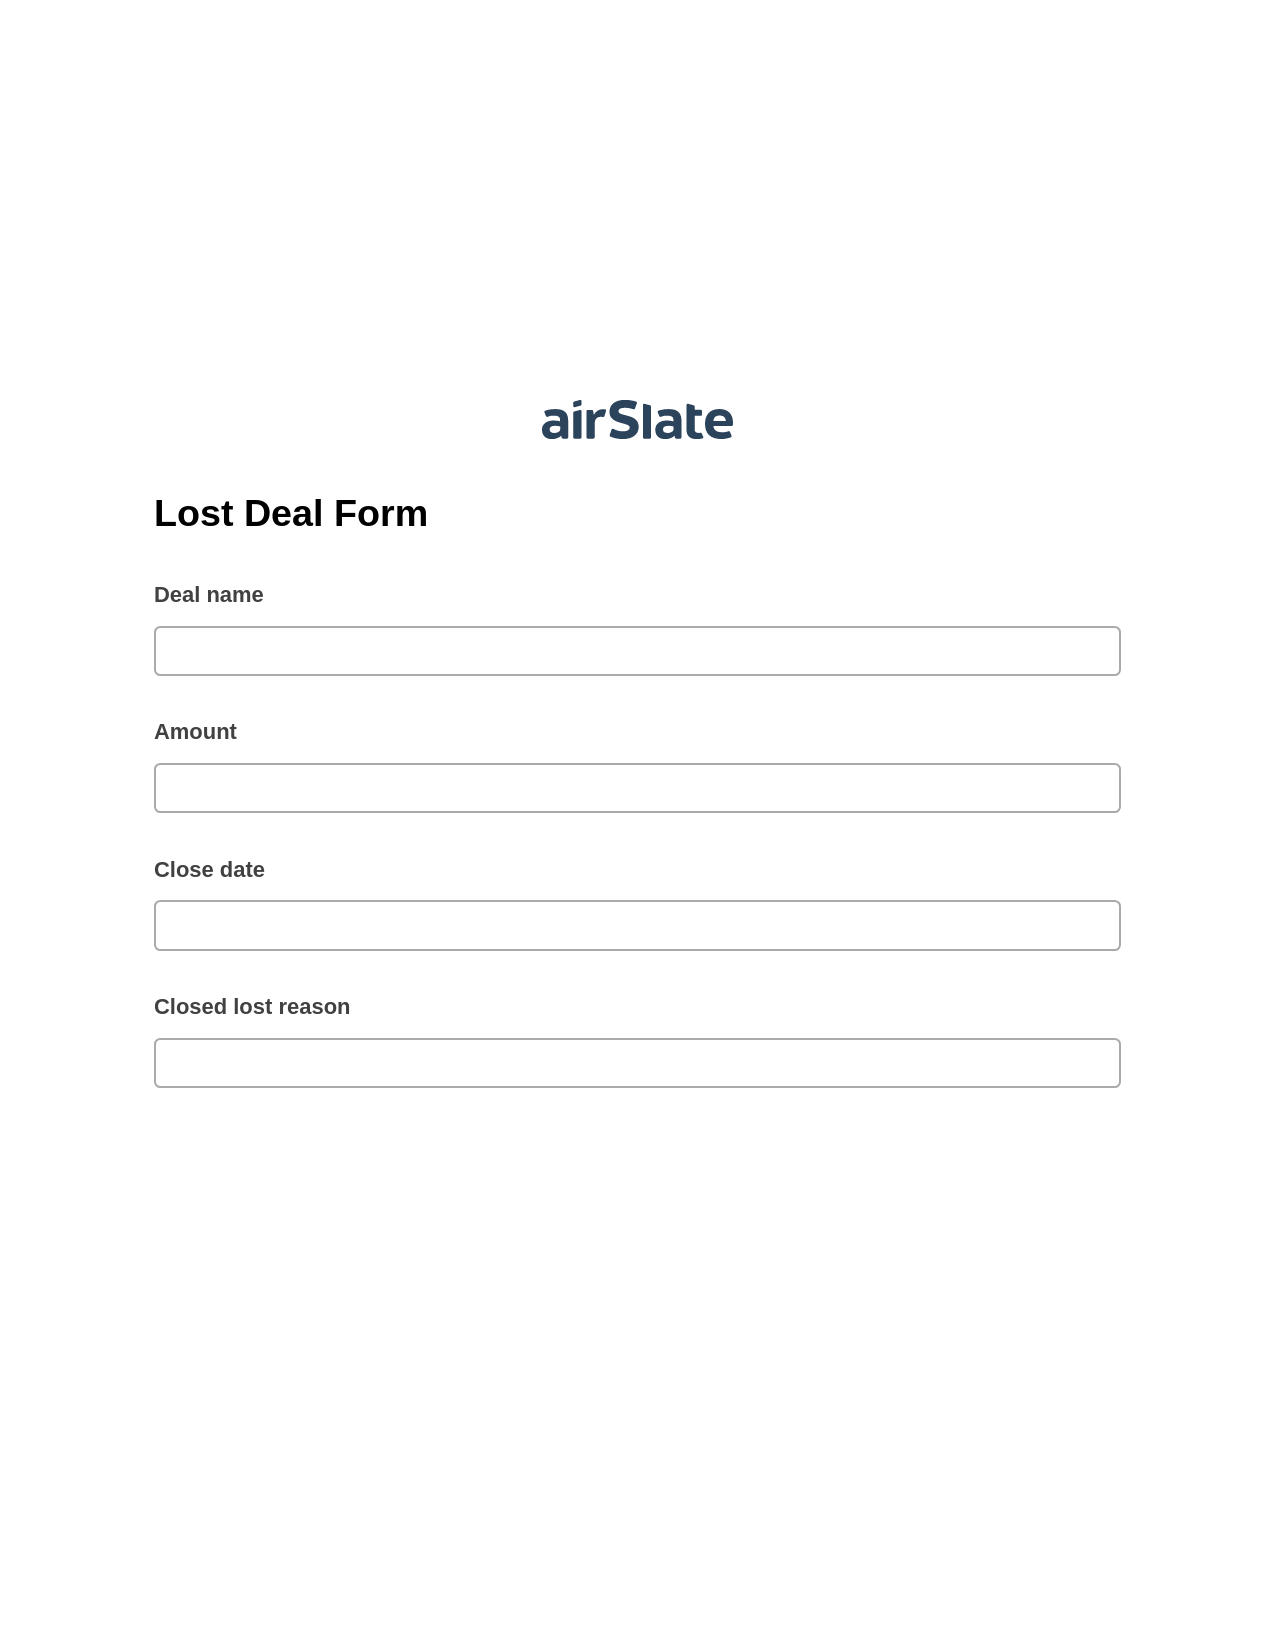 Lost Deal Form Pre-fill Document Bot, Custom Field's Value Bot, Export to Salesforce Record Bot